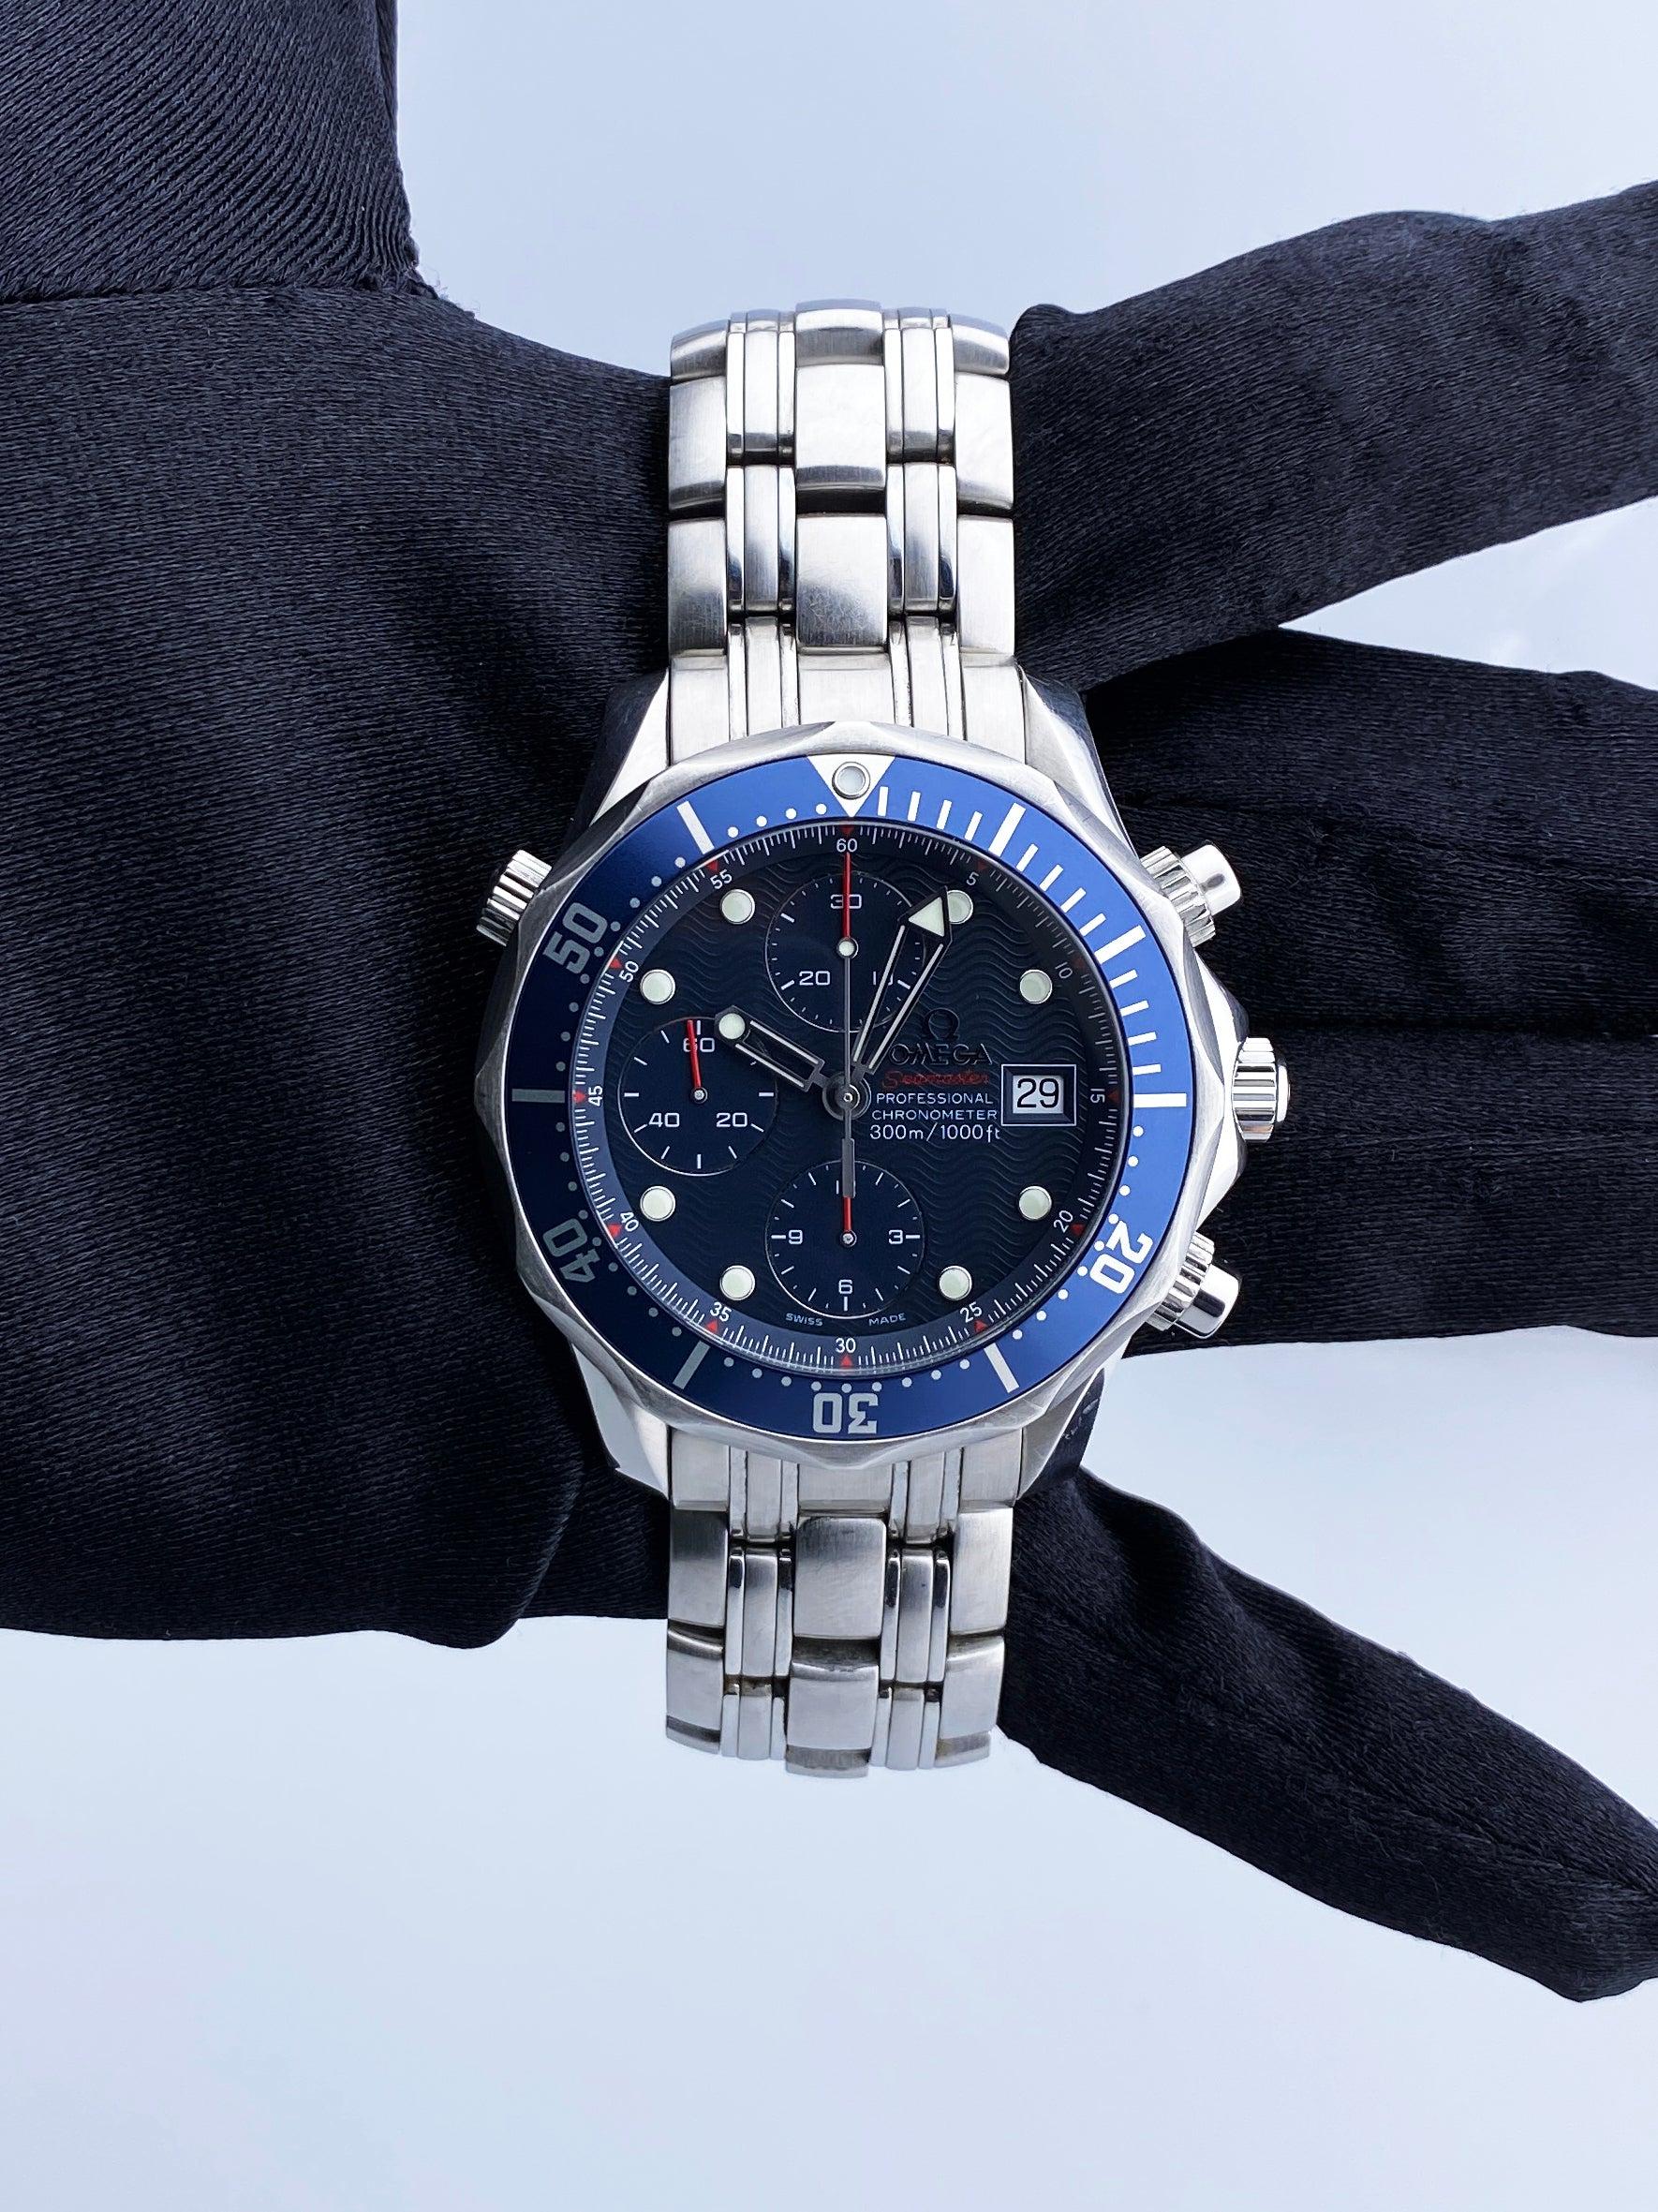 Omega Seamaster Professional Mens Watch. 42mm stainless steel case with stainless steel unidirectional rotating bezel with blue bezel insert. Blue wave dial with luminous steel hands and dot hour markers. Date display at the 3 o'clock position.